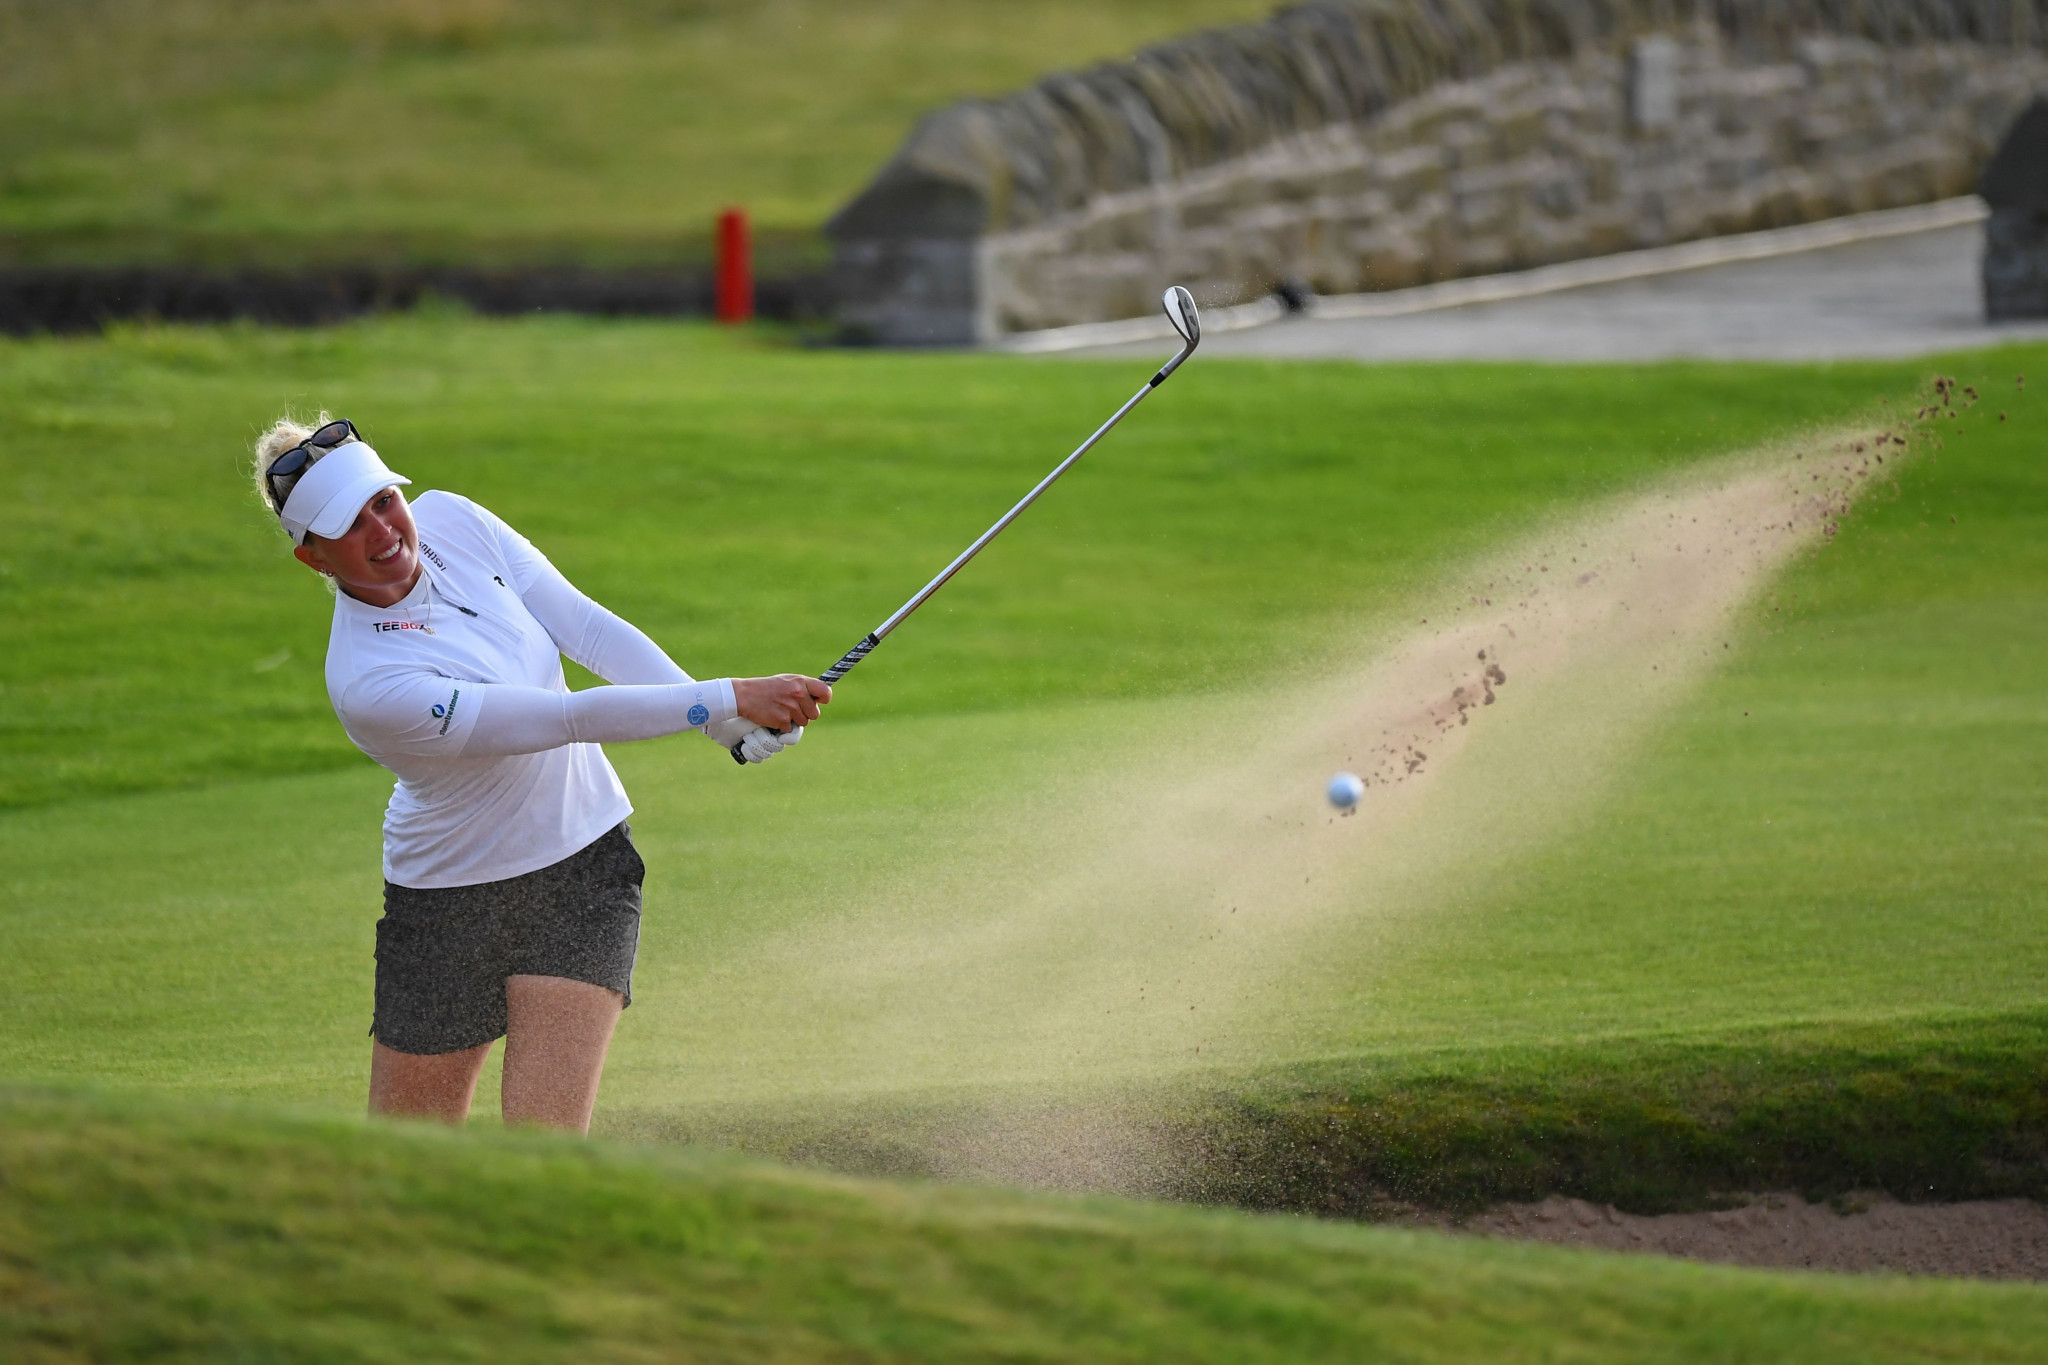 Nanna Koerstz Madsen was tied for the lead heading into the final hole at Carnoustie ©Getty Images